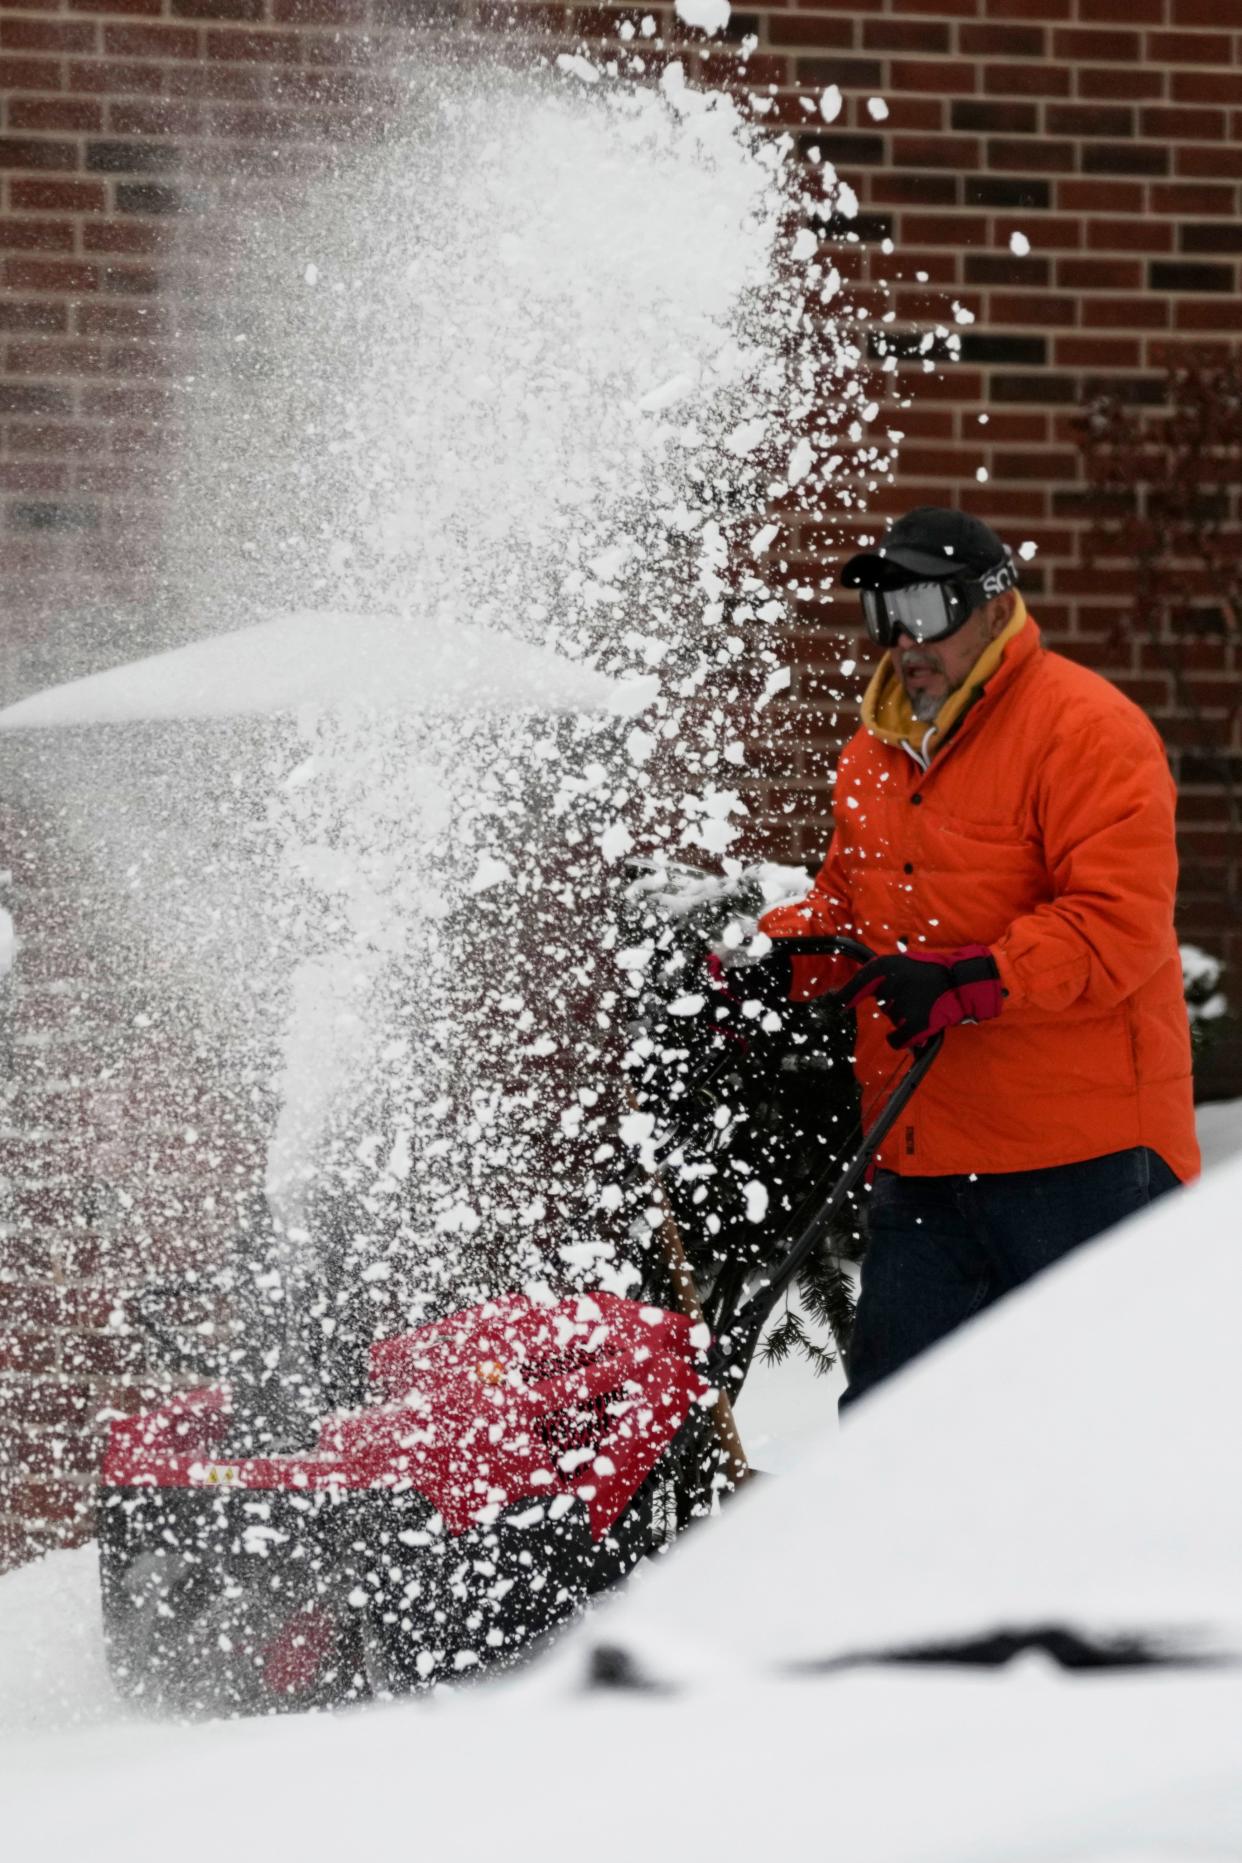 A man clears snow from a sidewalk on Jan. 29, 2023, in Evanston, Ill.